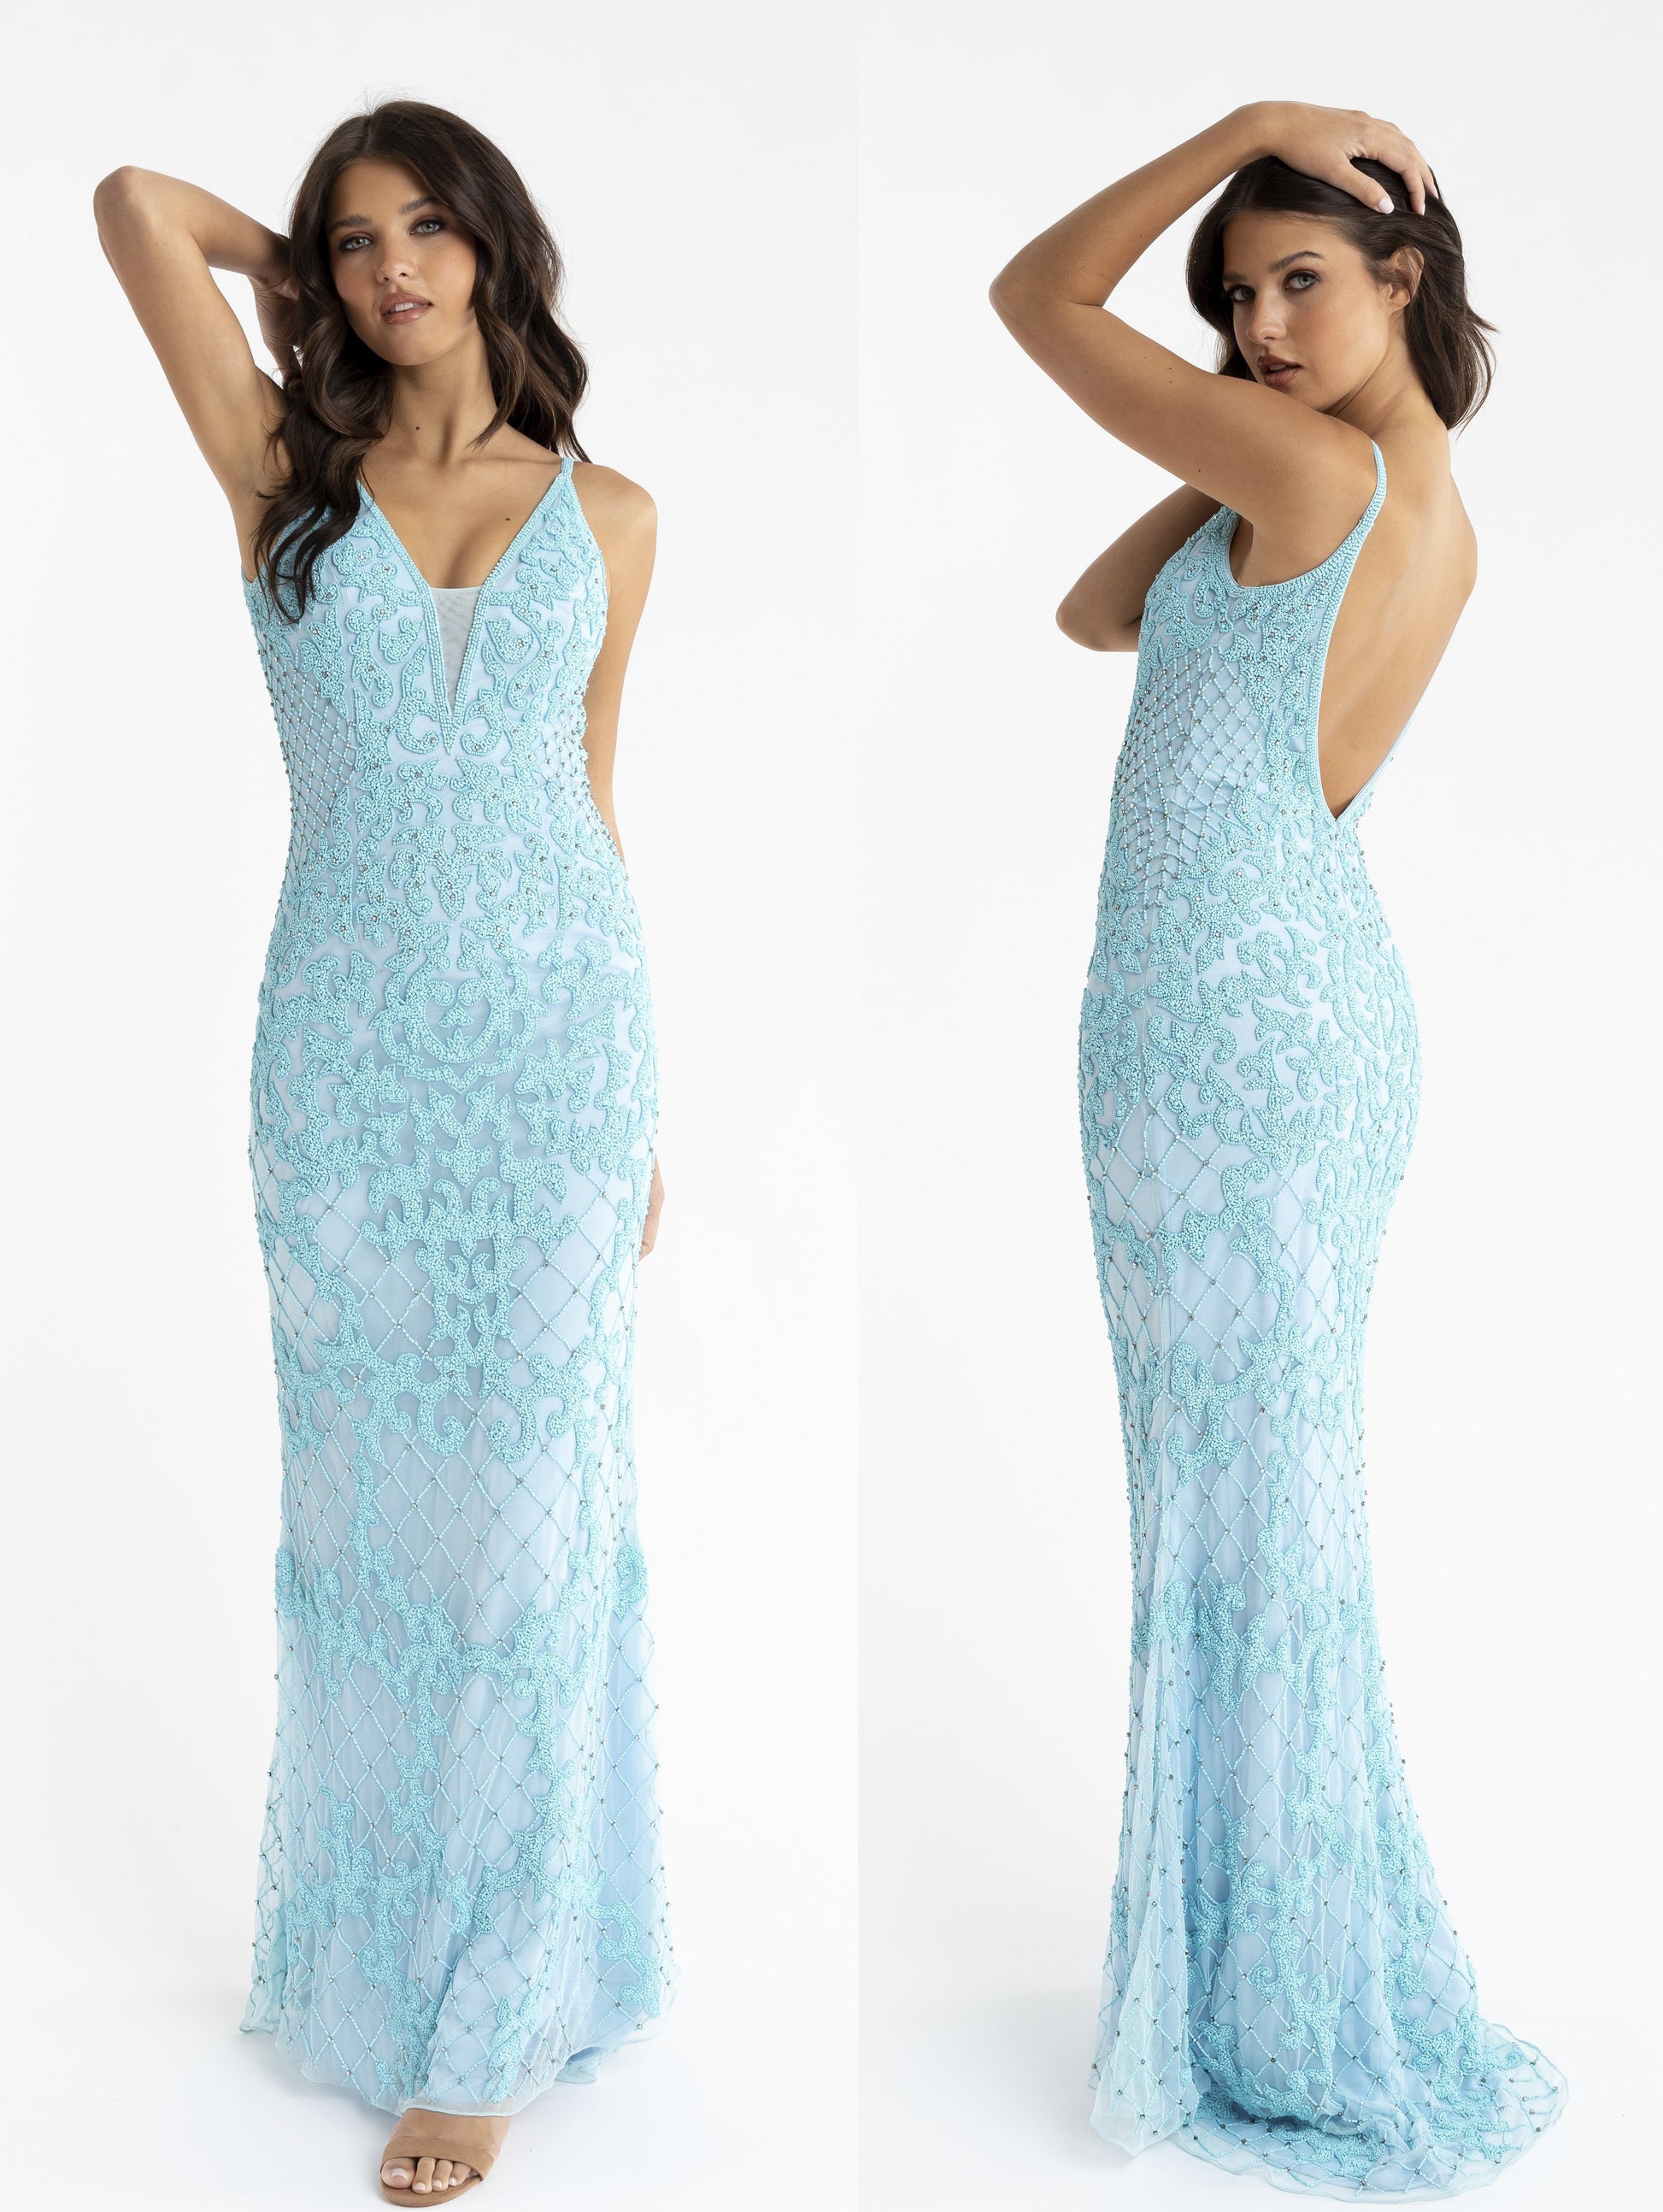 PRIMAVERA-COUTURE-3433-TURQUOISE-PROM-DRESS-FRONT-LONG-BEADED-V-NECKLINE-BACKLESS